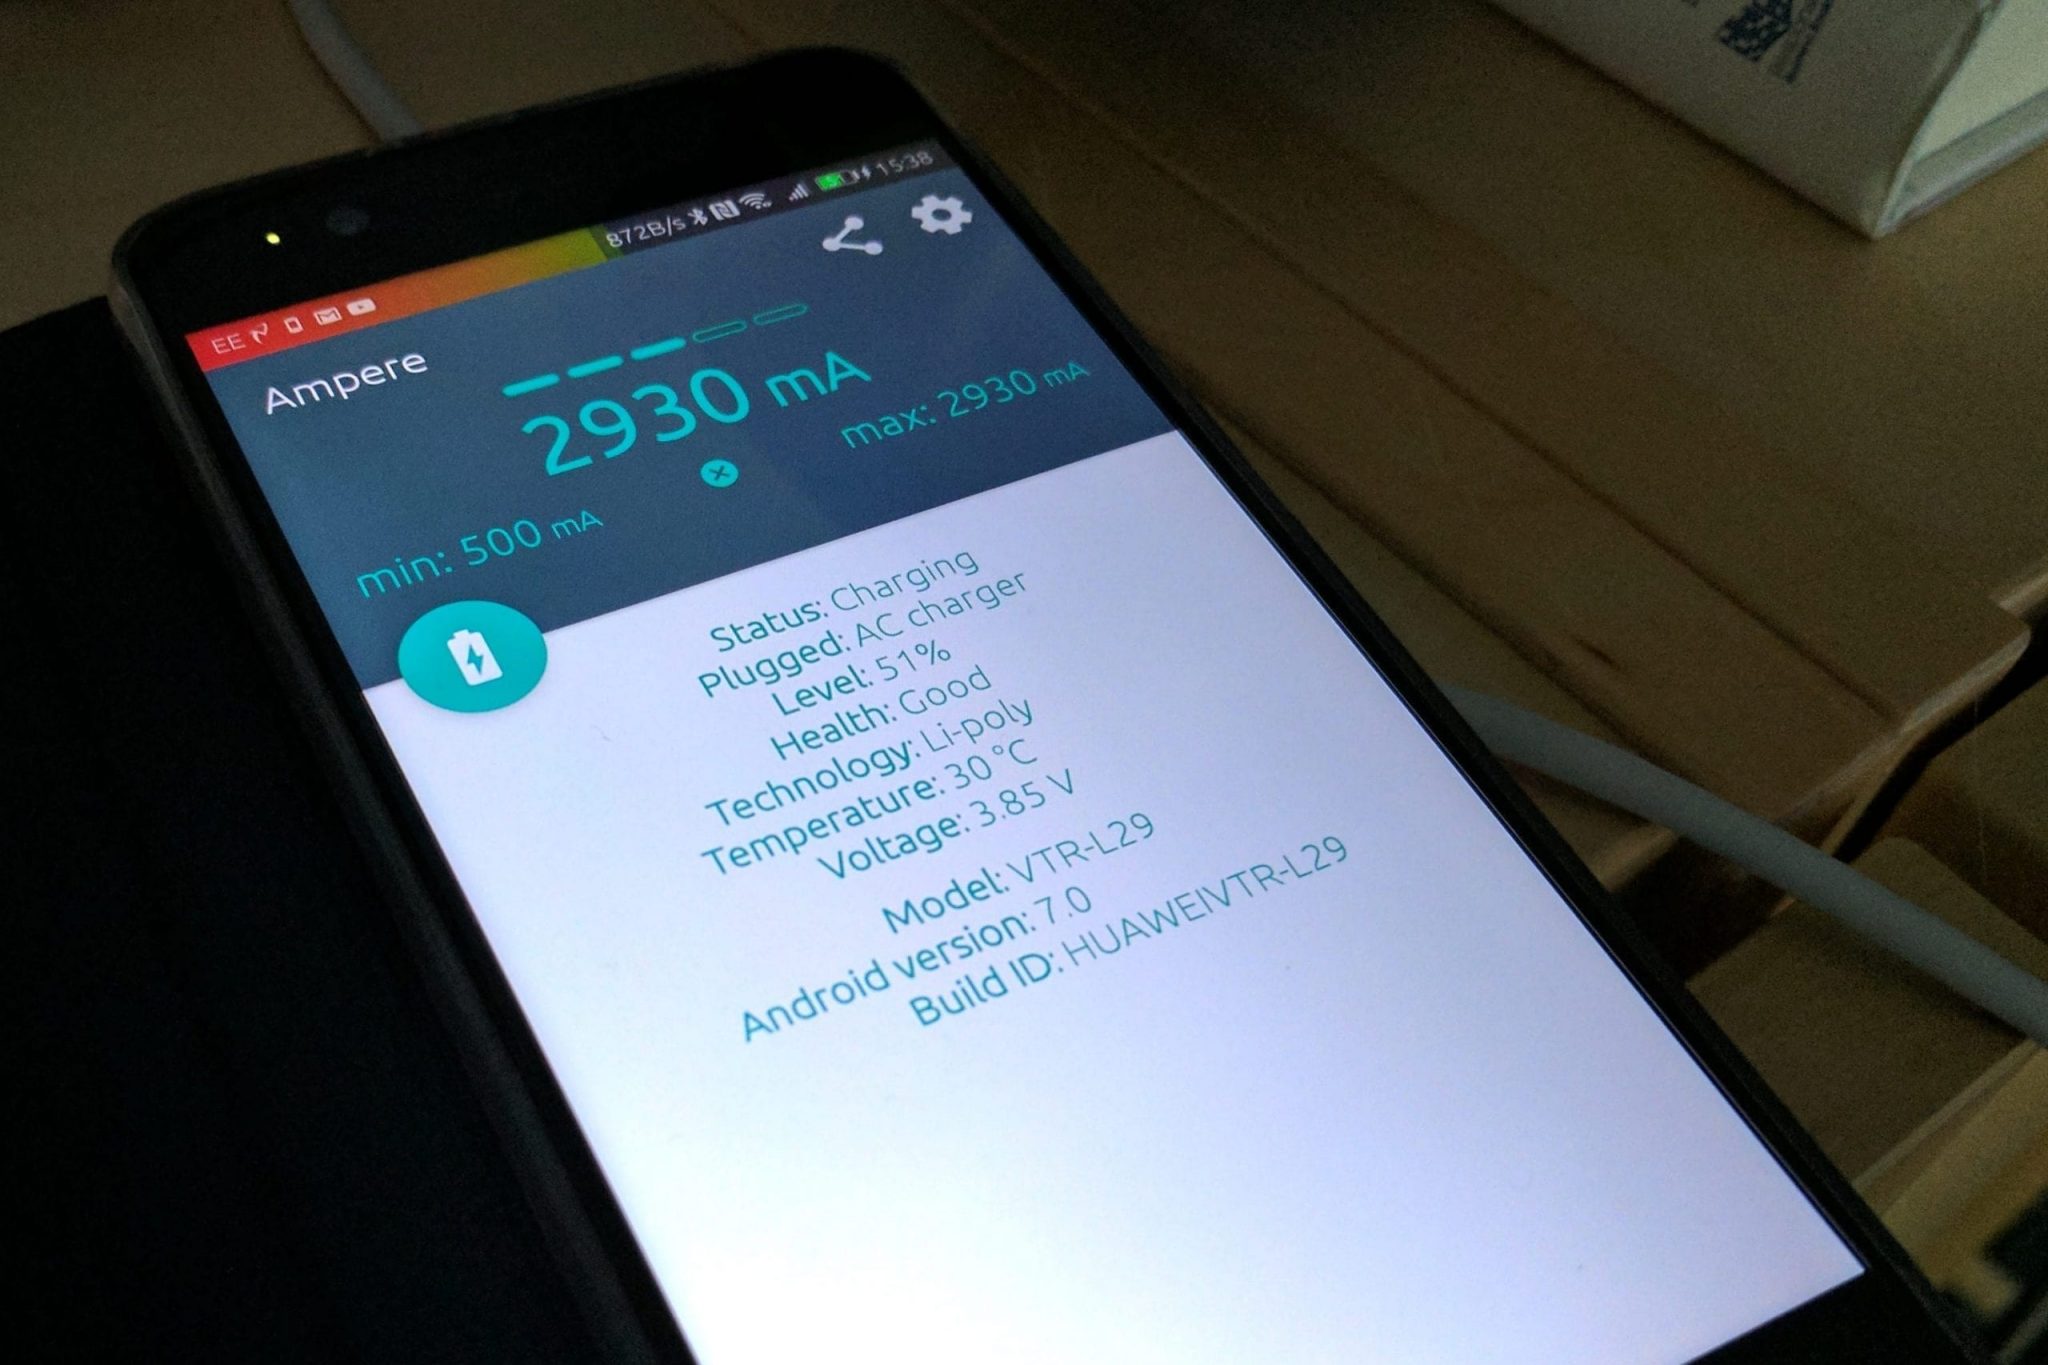 P10 Super Charging: An incredibly fast way to get back to full power